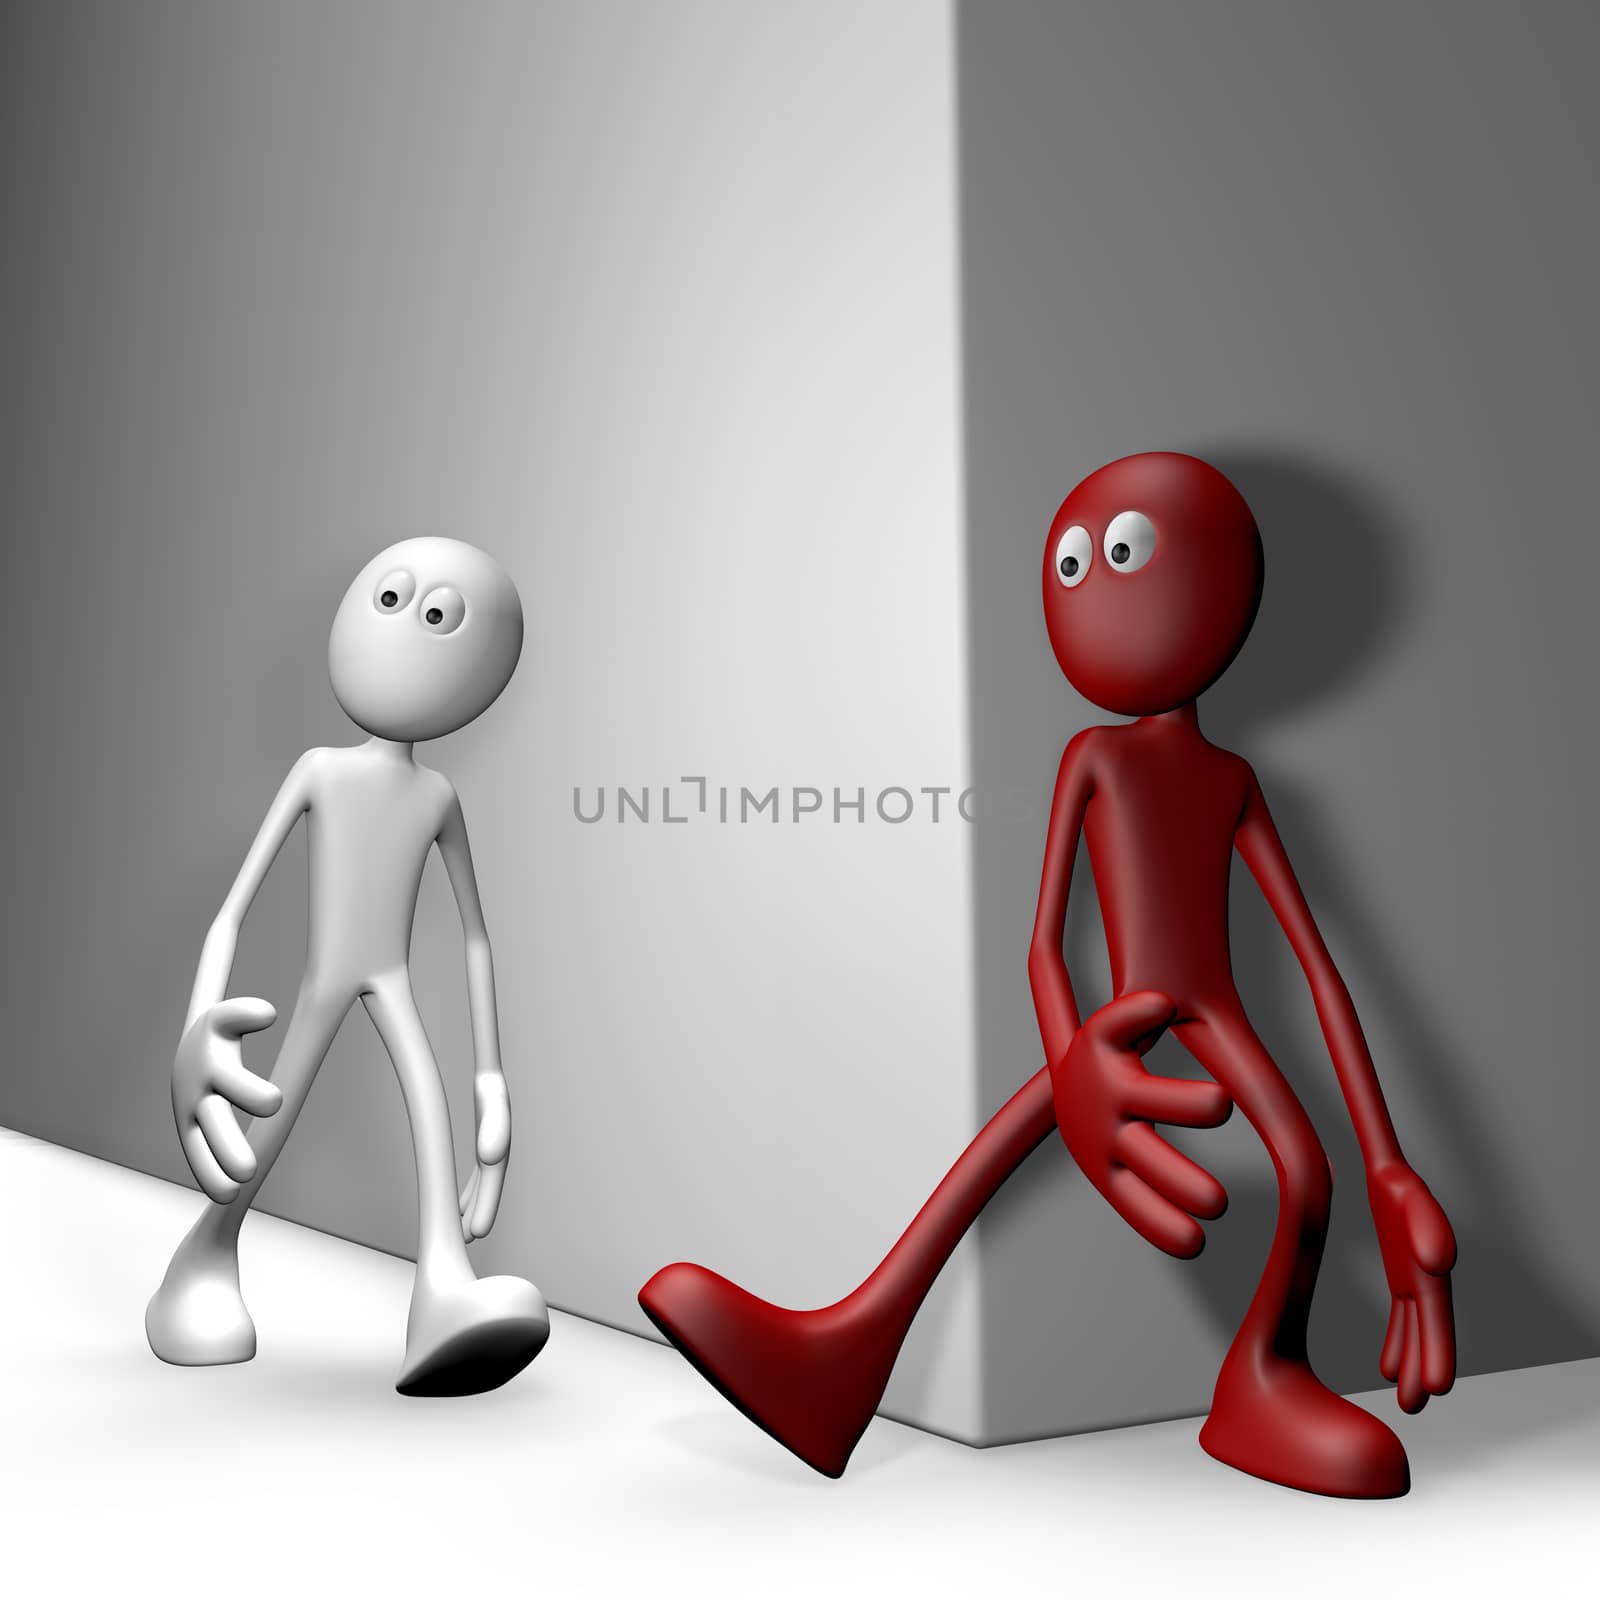 red guy tries get white guy to stumble - 3d illustration